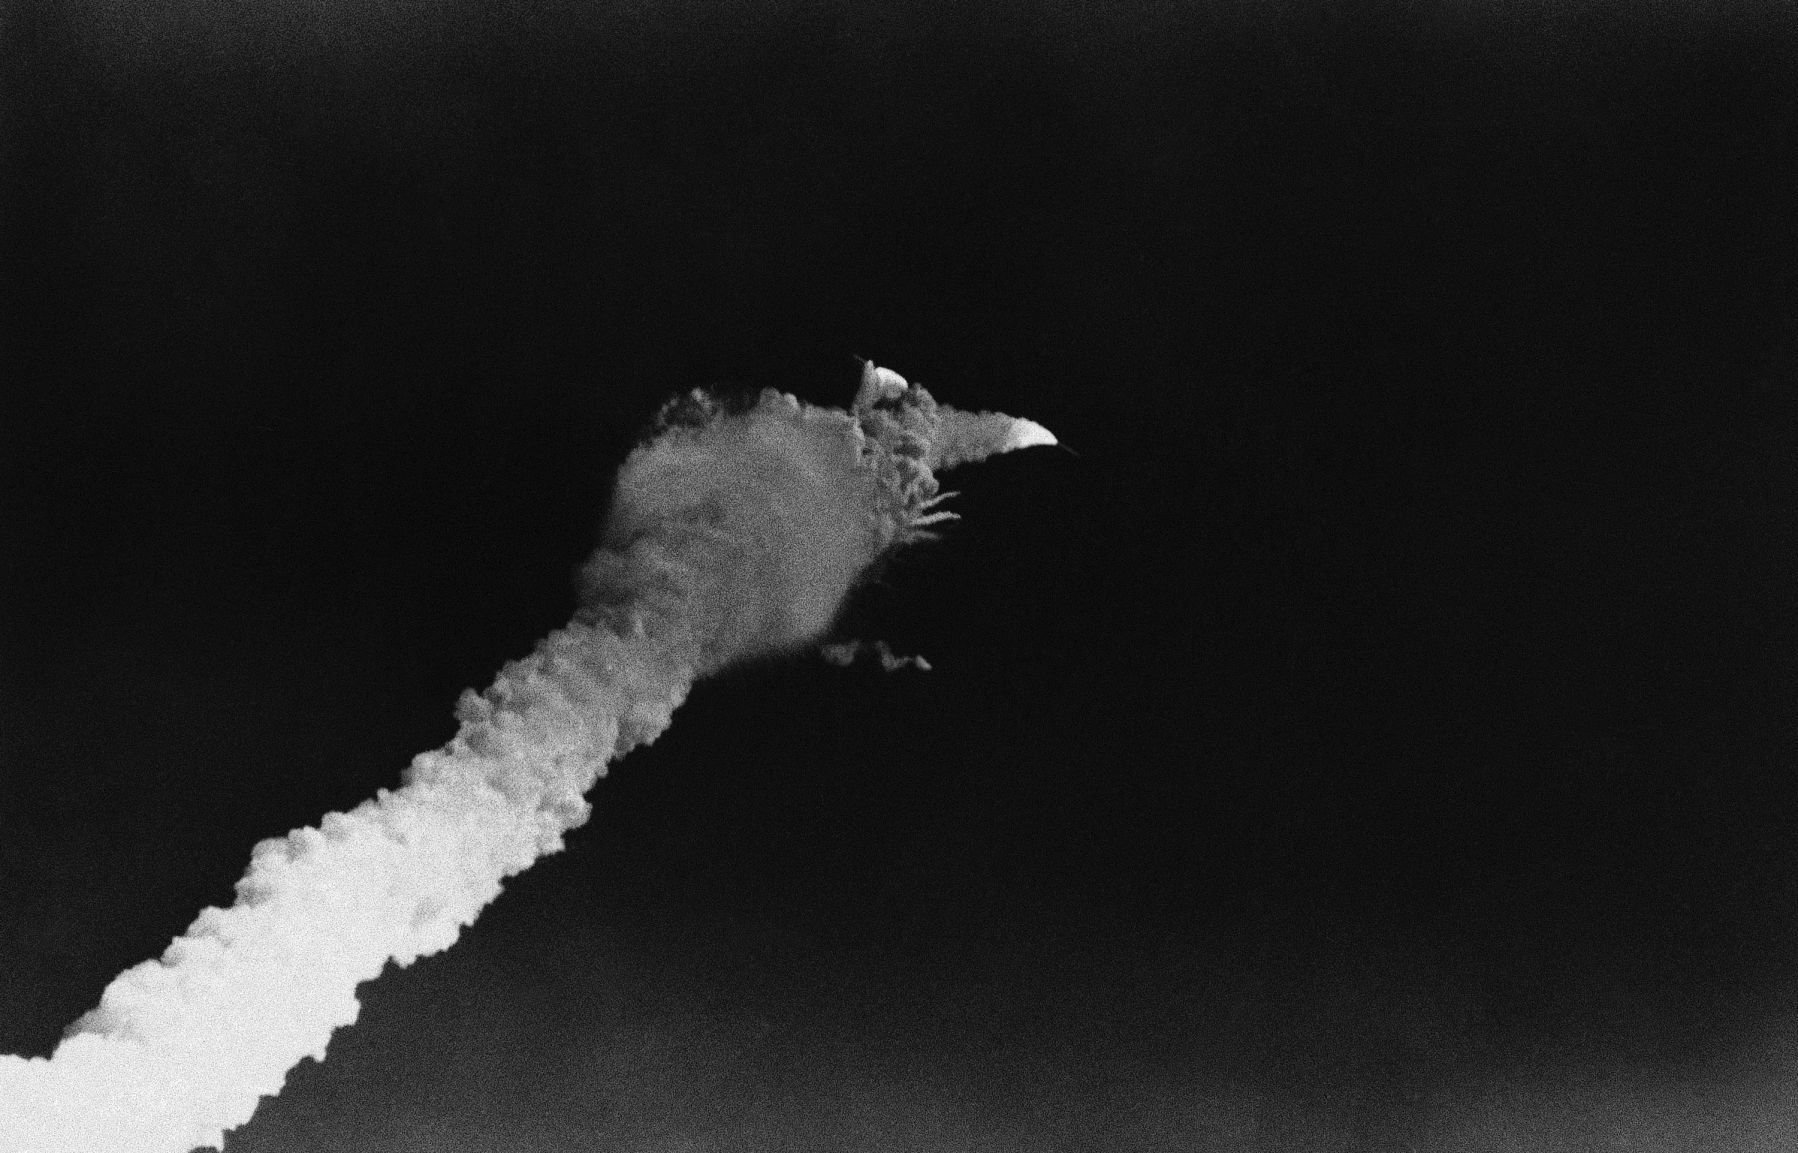 space shuttle explosion 1986